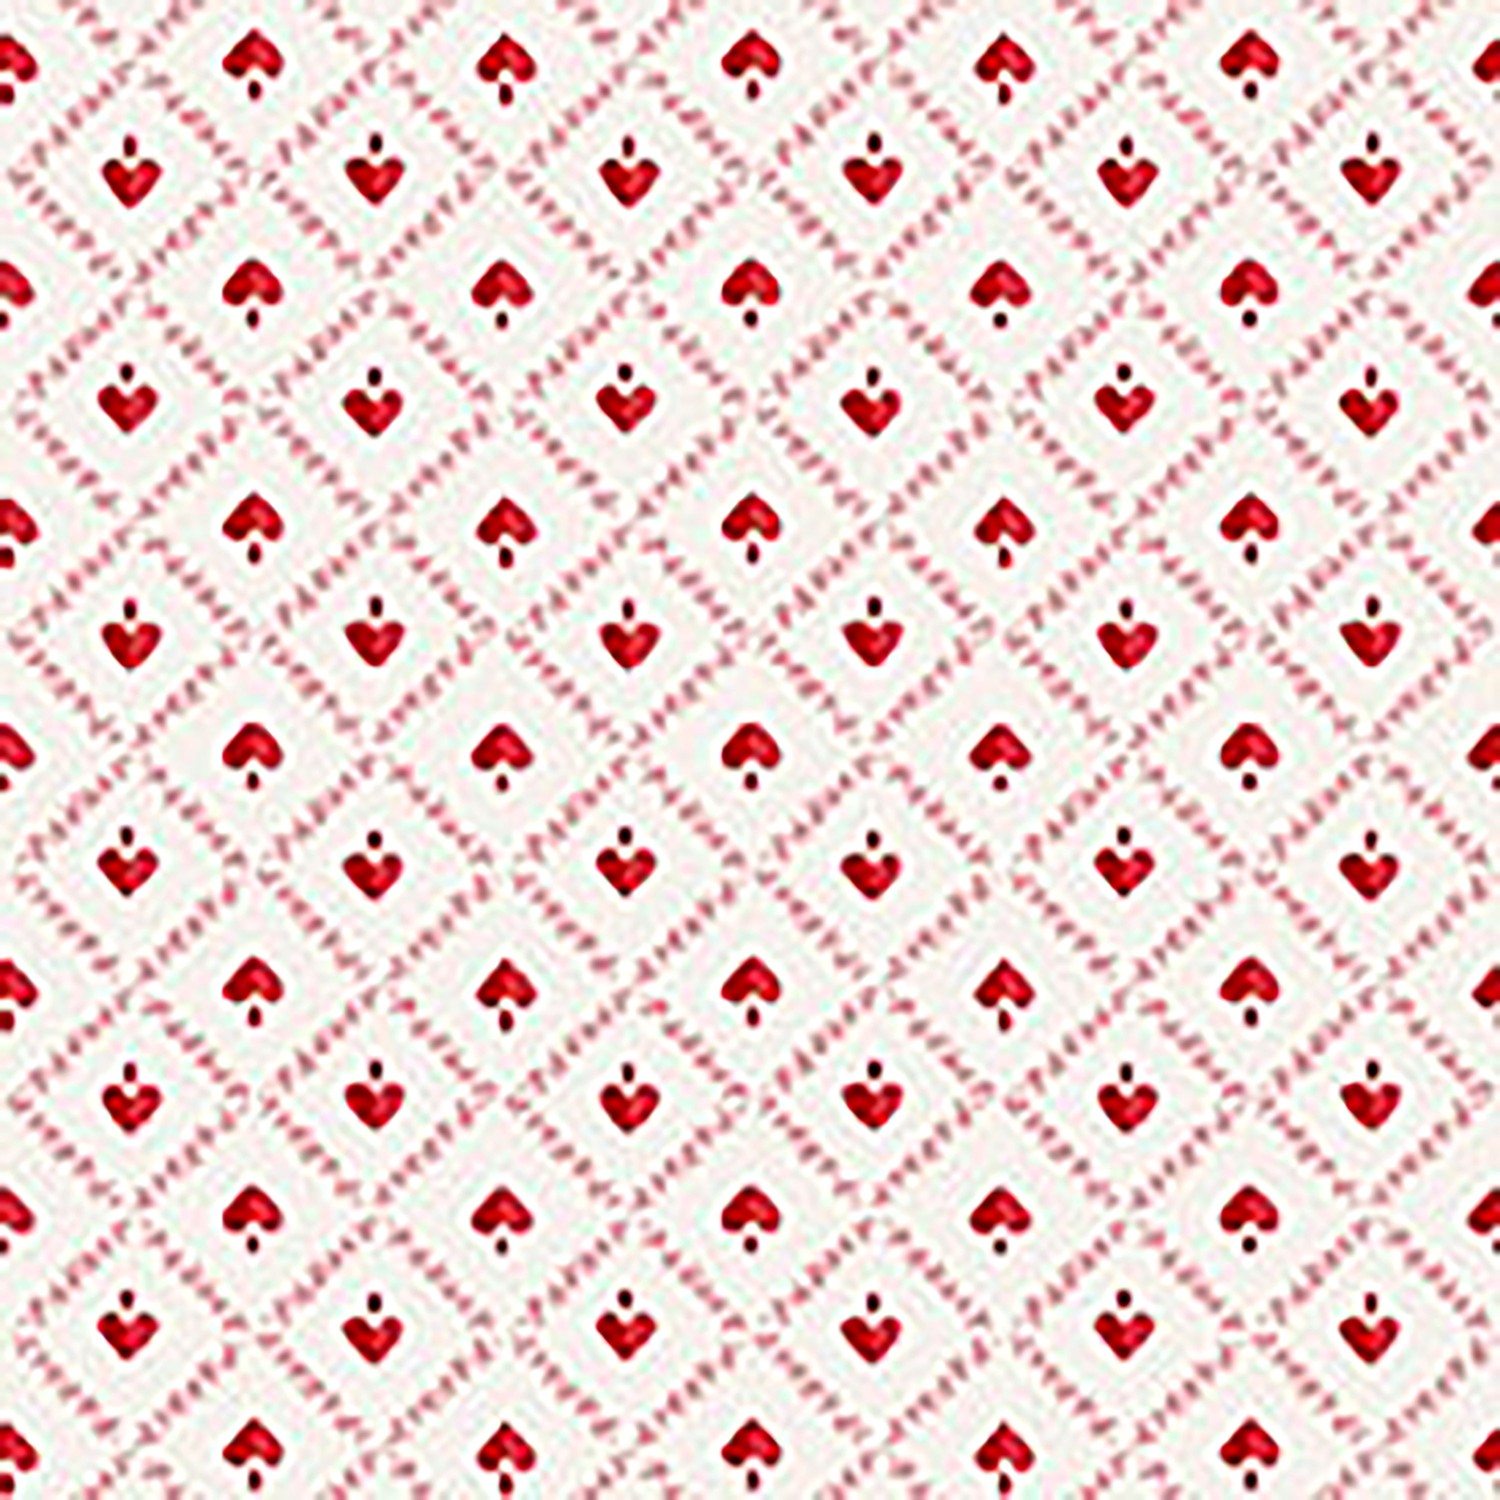 Cotton Hearts Pink Red Valentine's Day Love Color My Valentine Fabric Print  By The Yard